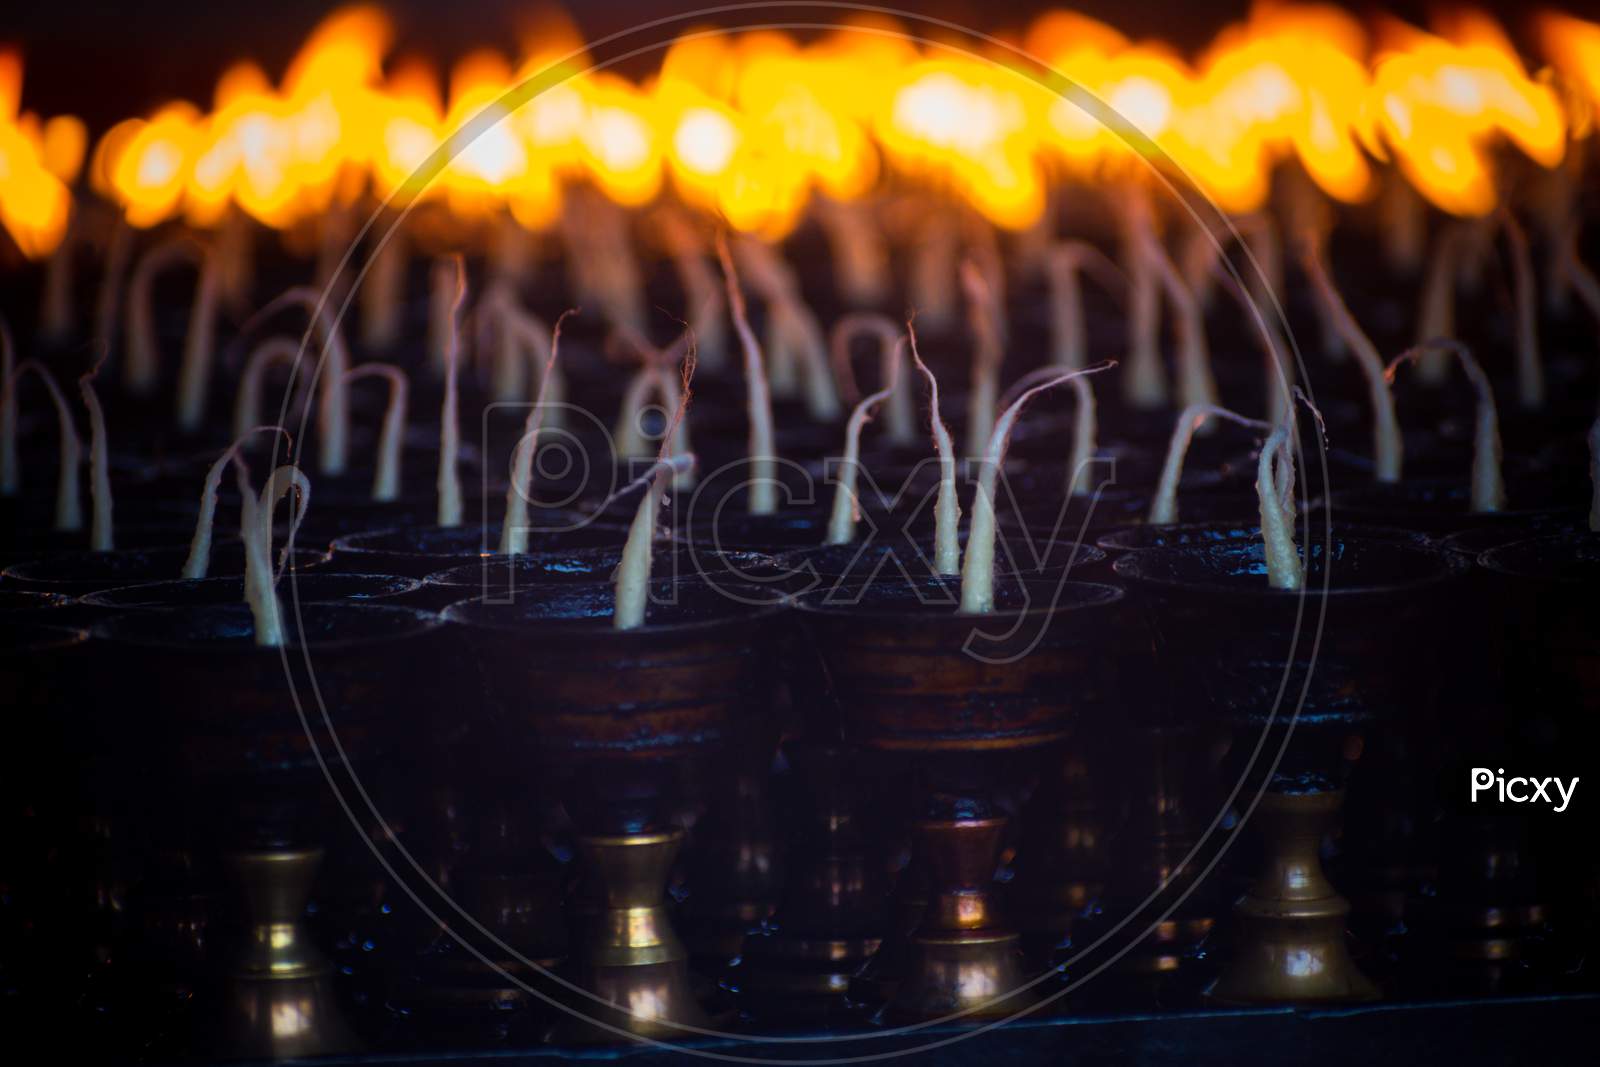 Fire flames of a candle or diya in Monestry